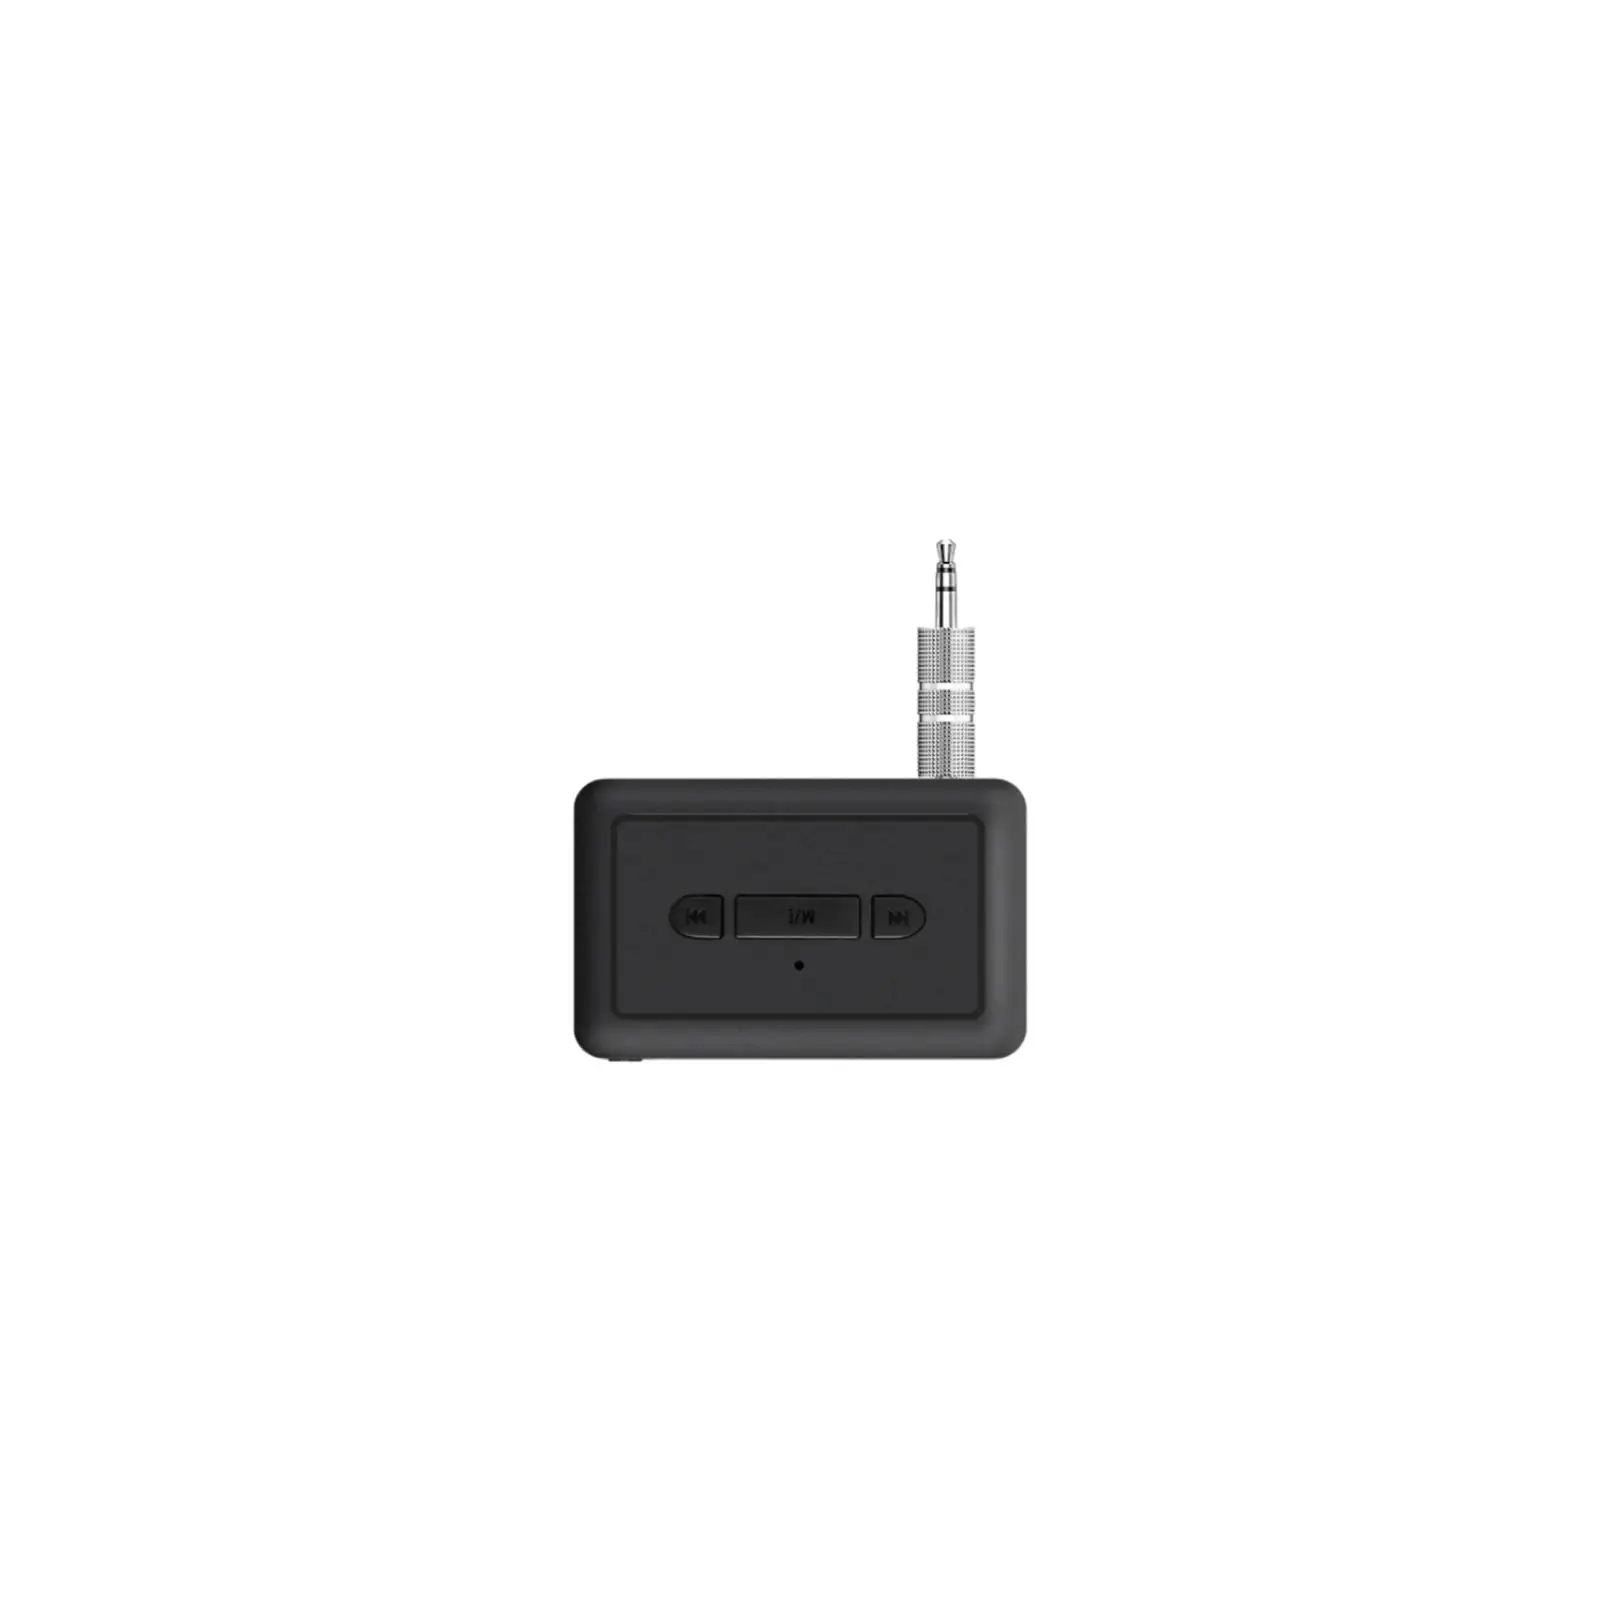 AUX Transmitter and Receiver U Disk Dual Connection Stereo Audio Bluetooth Receiver AUX Adapter for PC Headphones TV MP3 MP4 Car